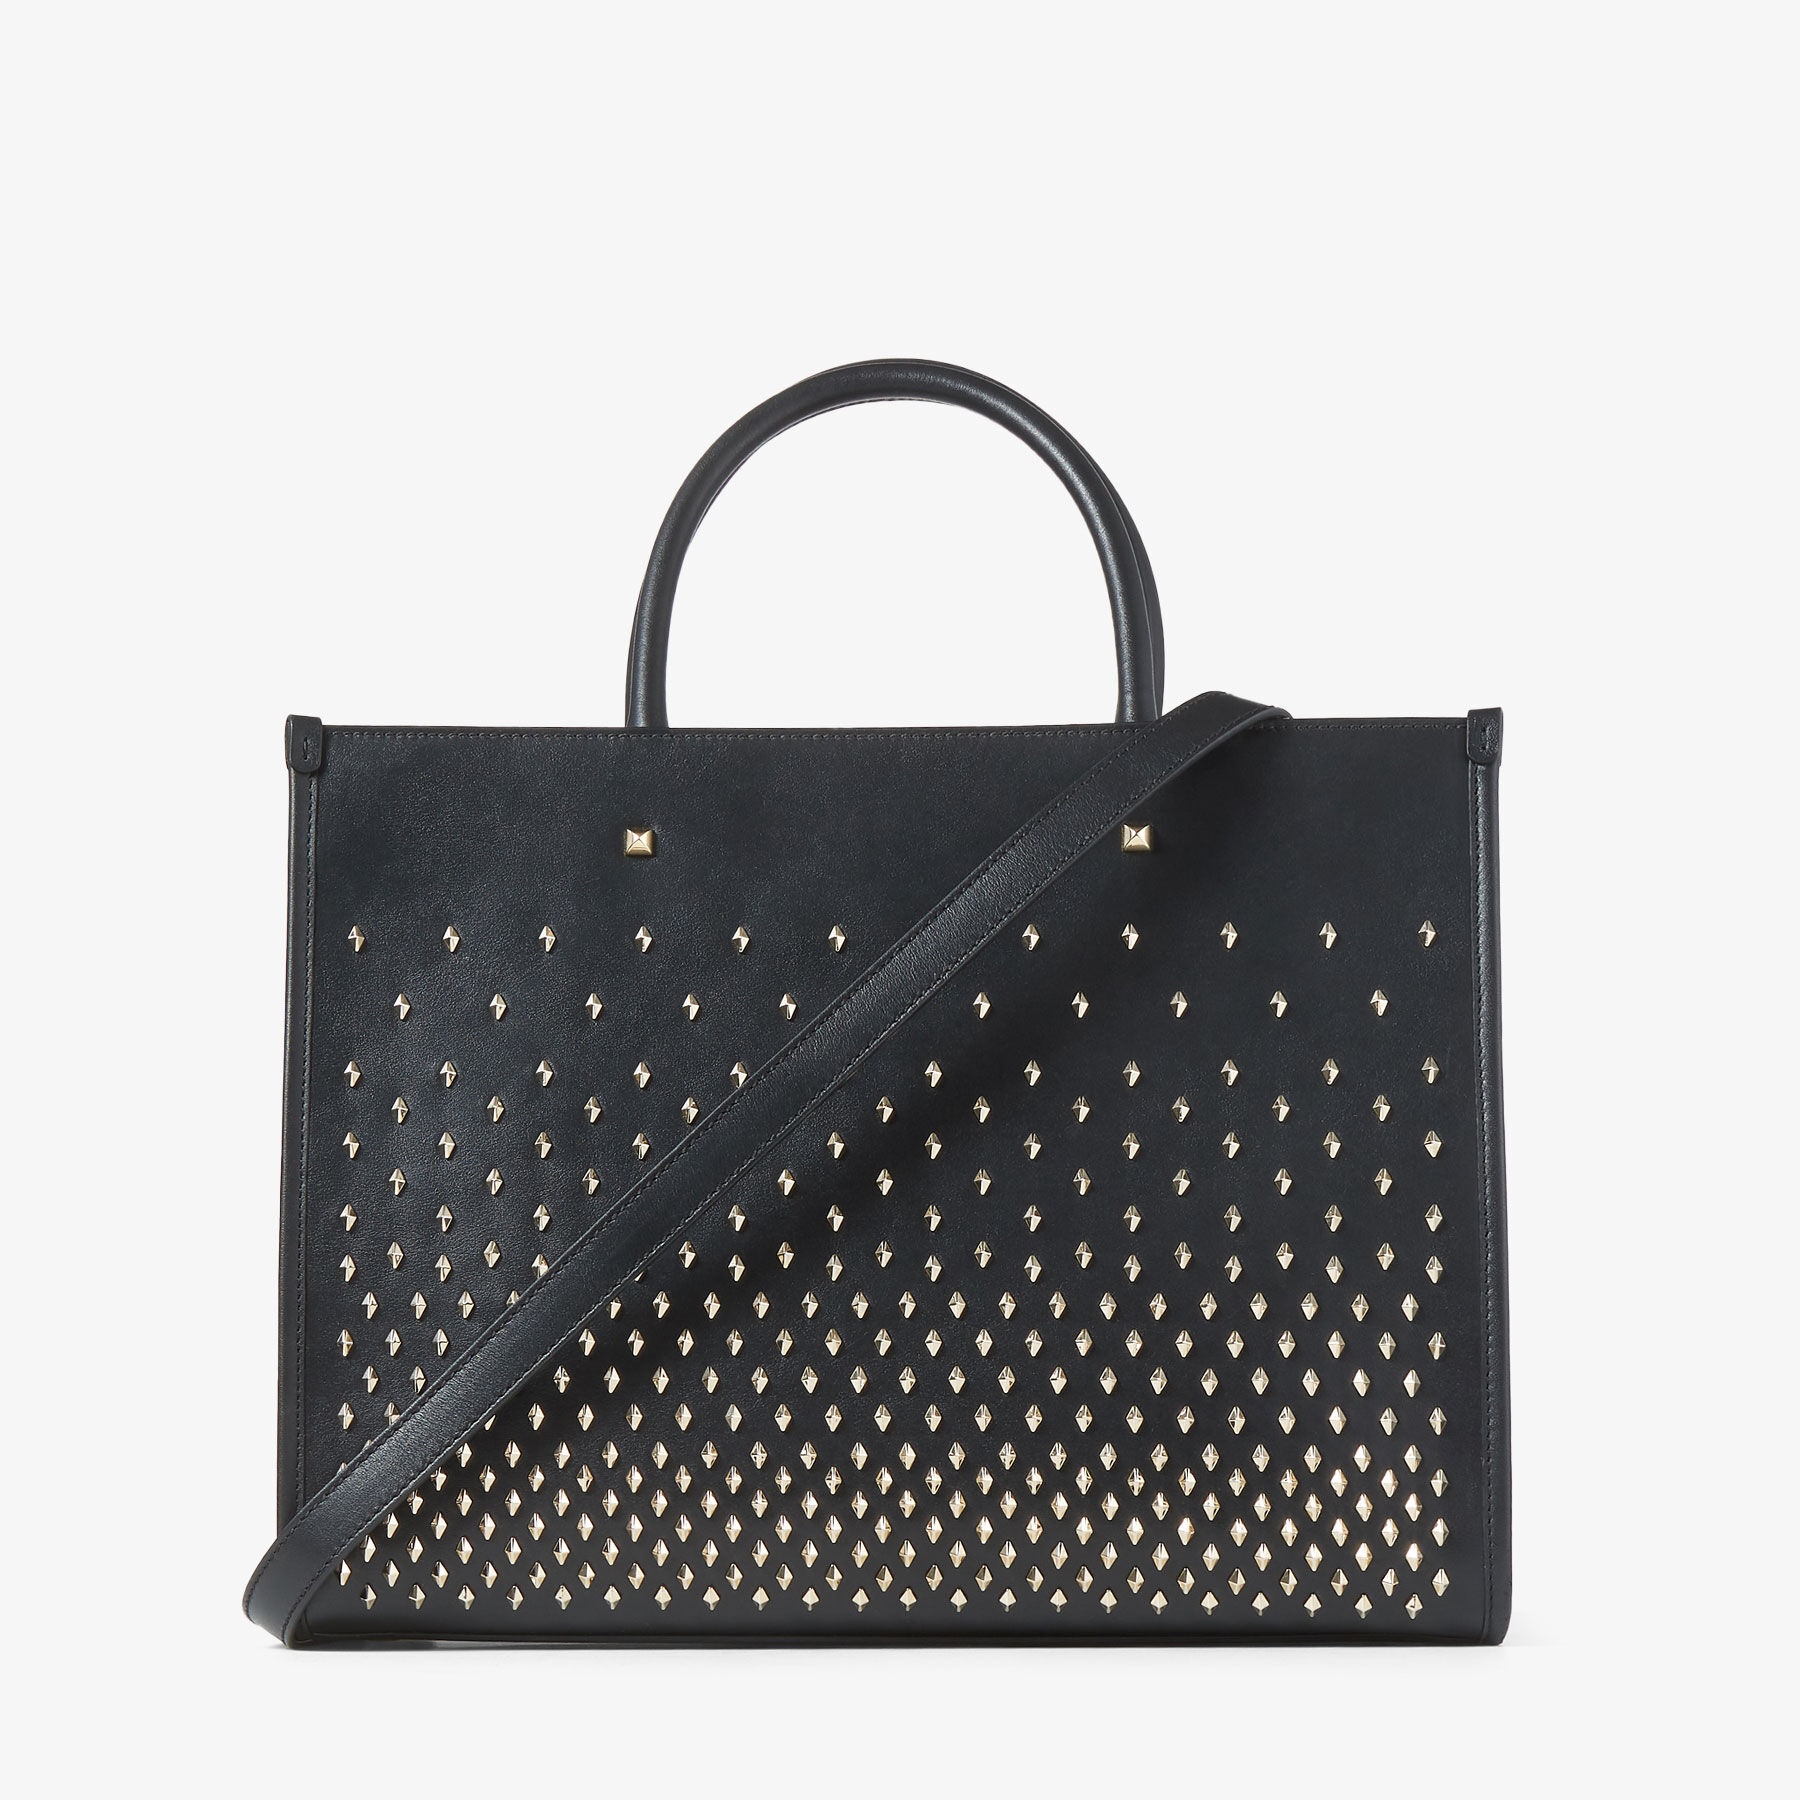 Varenne M Tote
Black Leather Tote Bag with Studs - 6